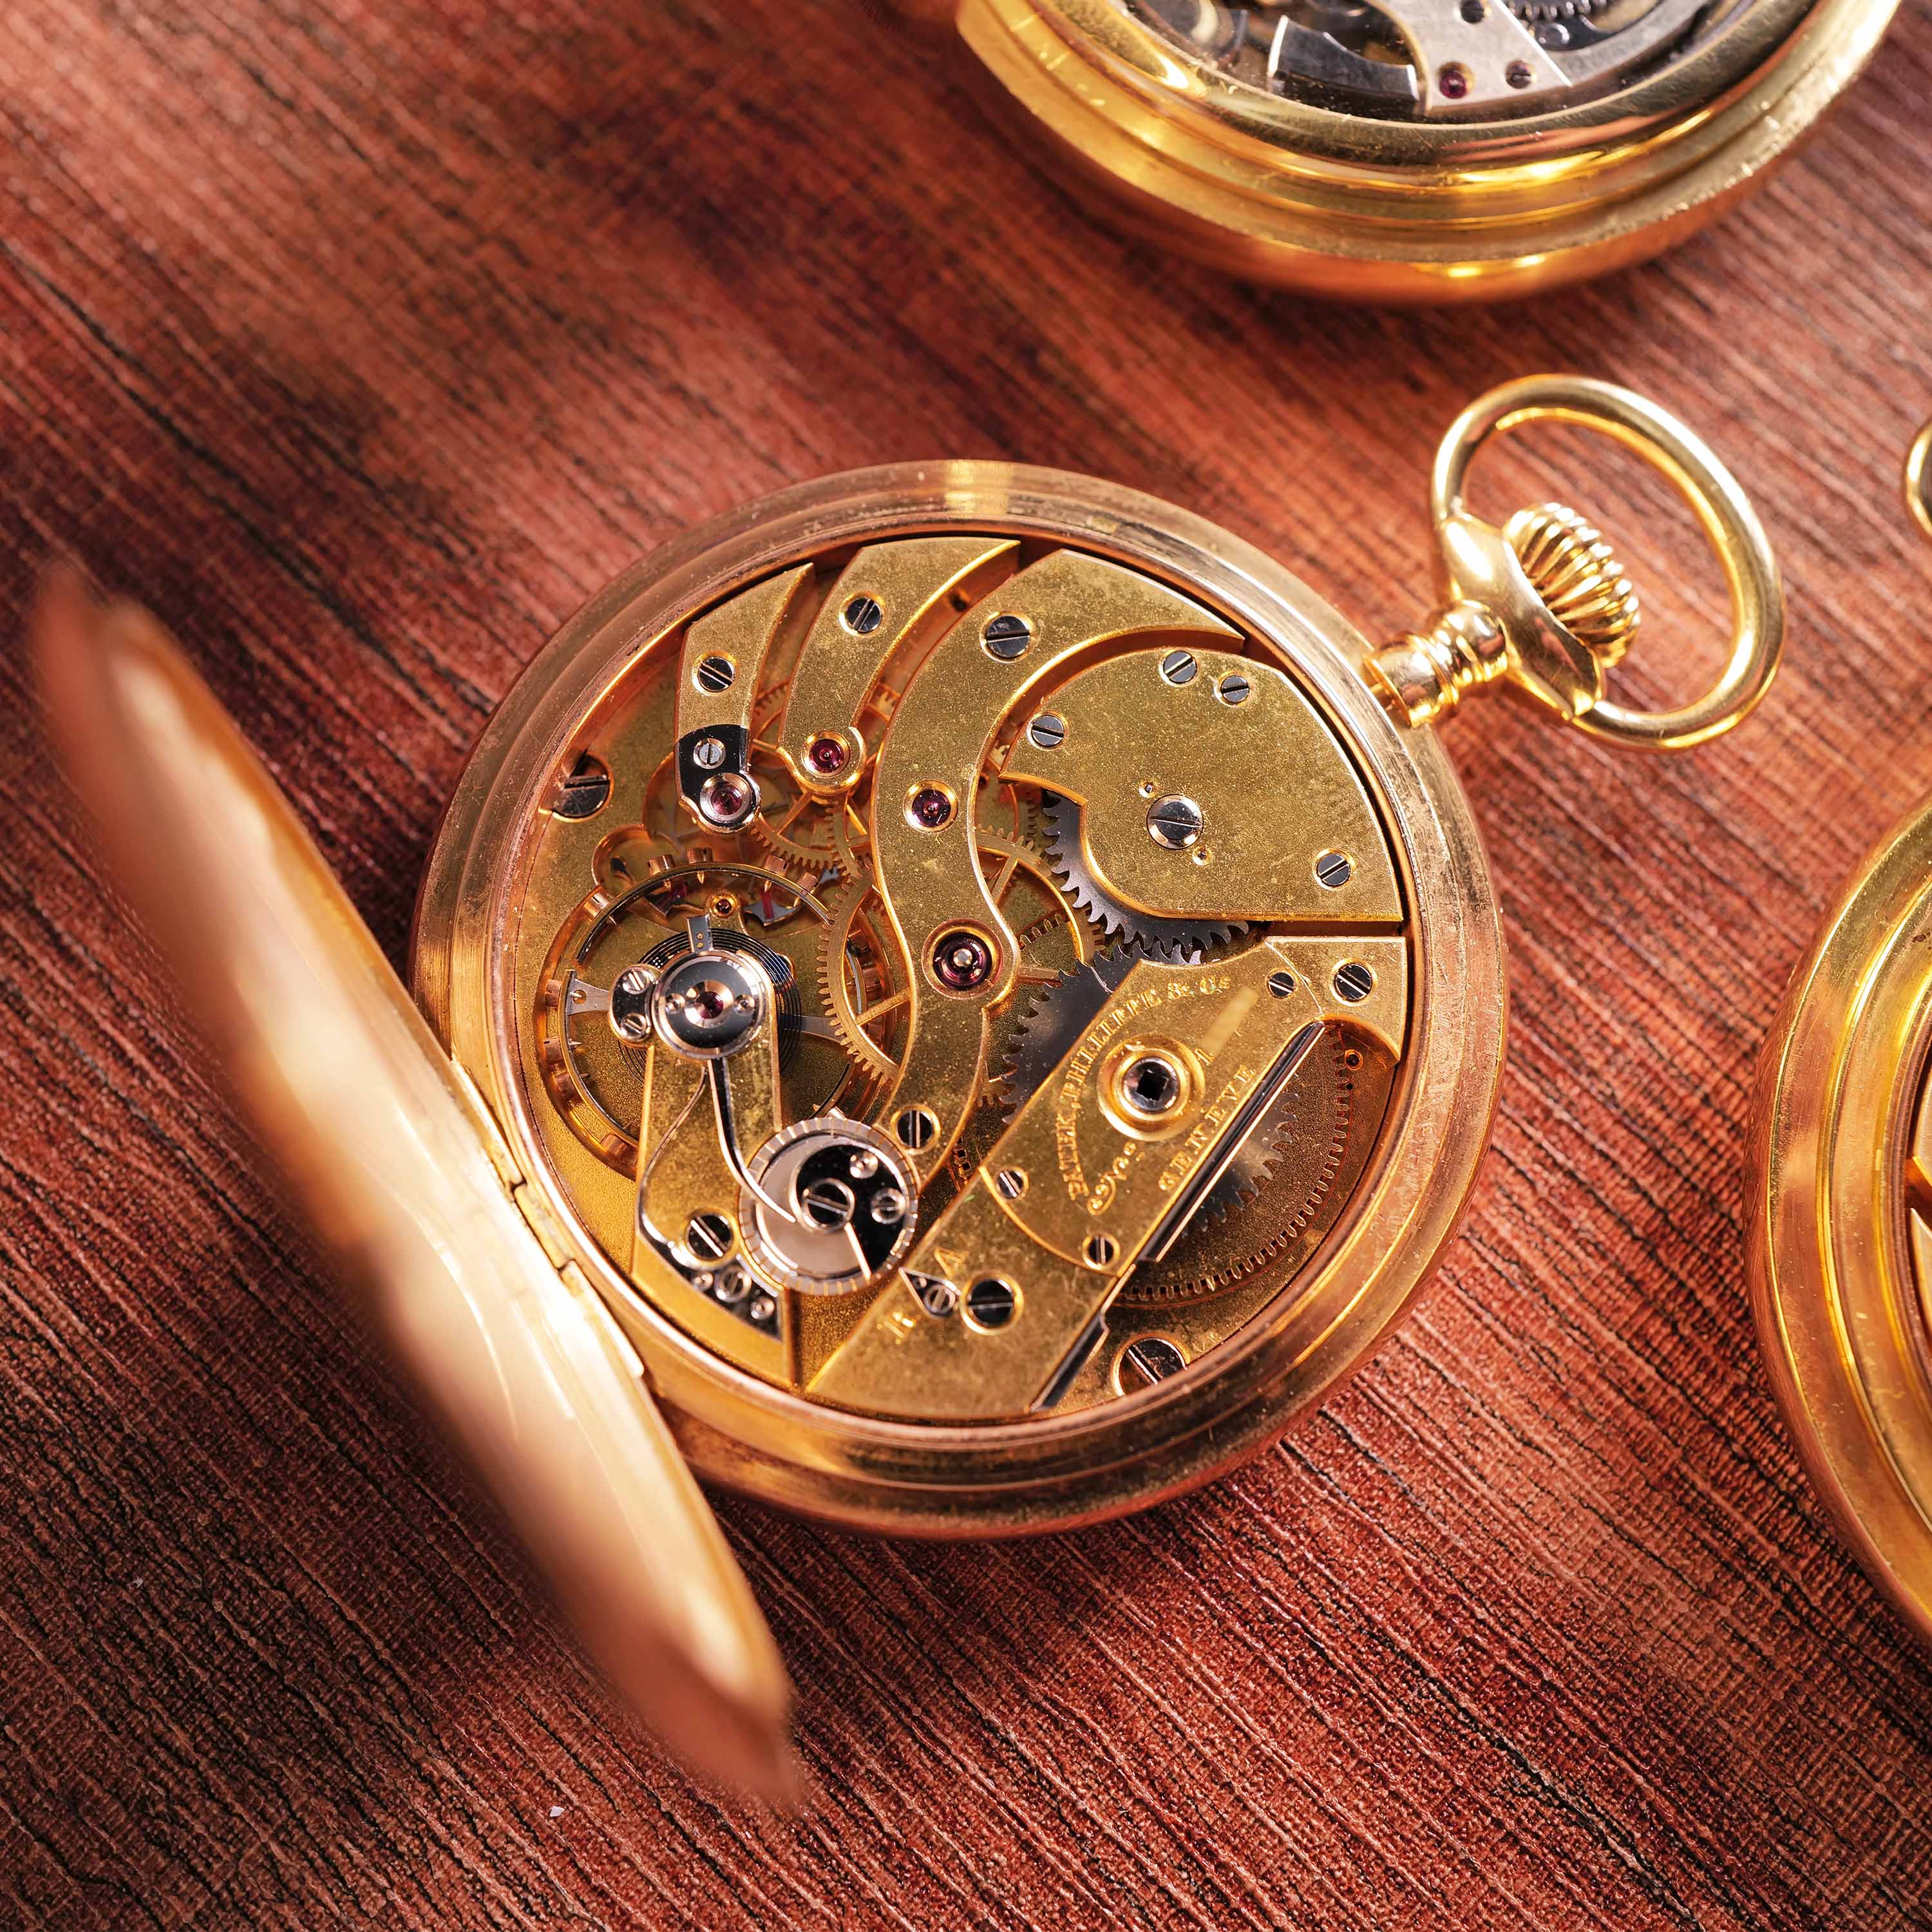 1302PW1 Patek Philippe Hunter Case with suspended Breguet numerals Pocket Watch img-main7